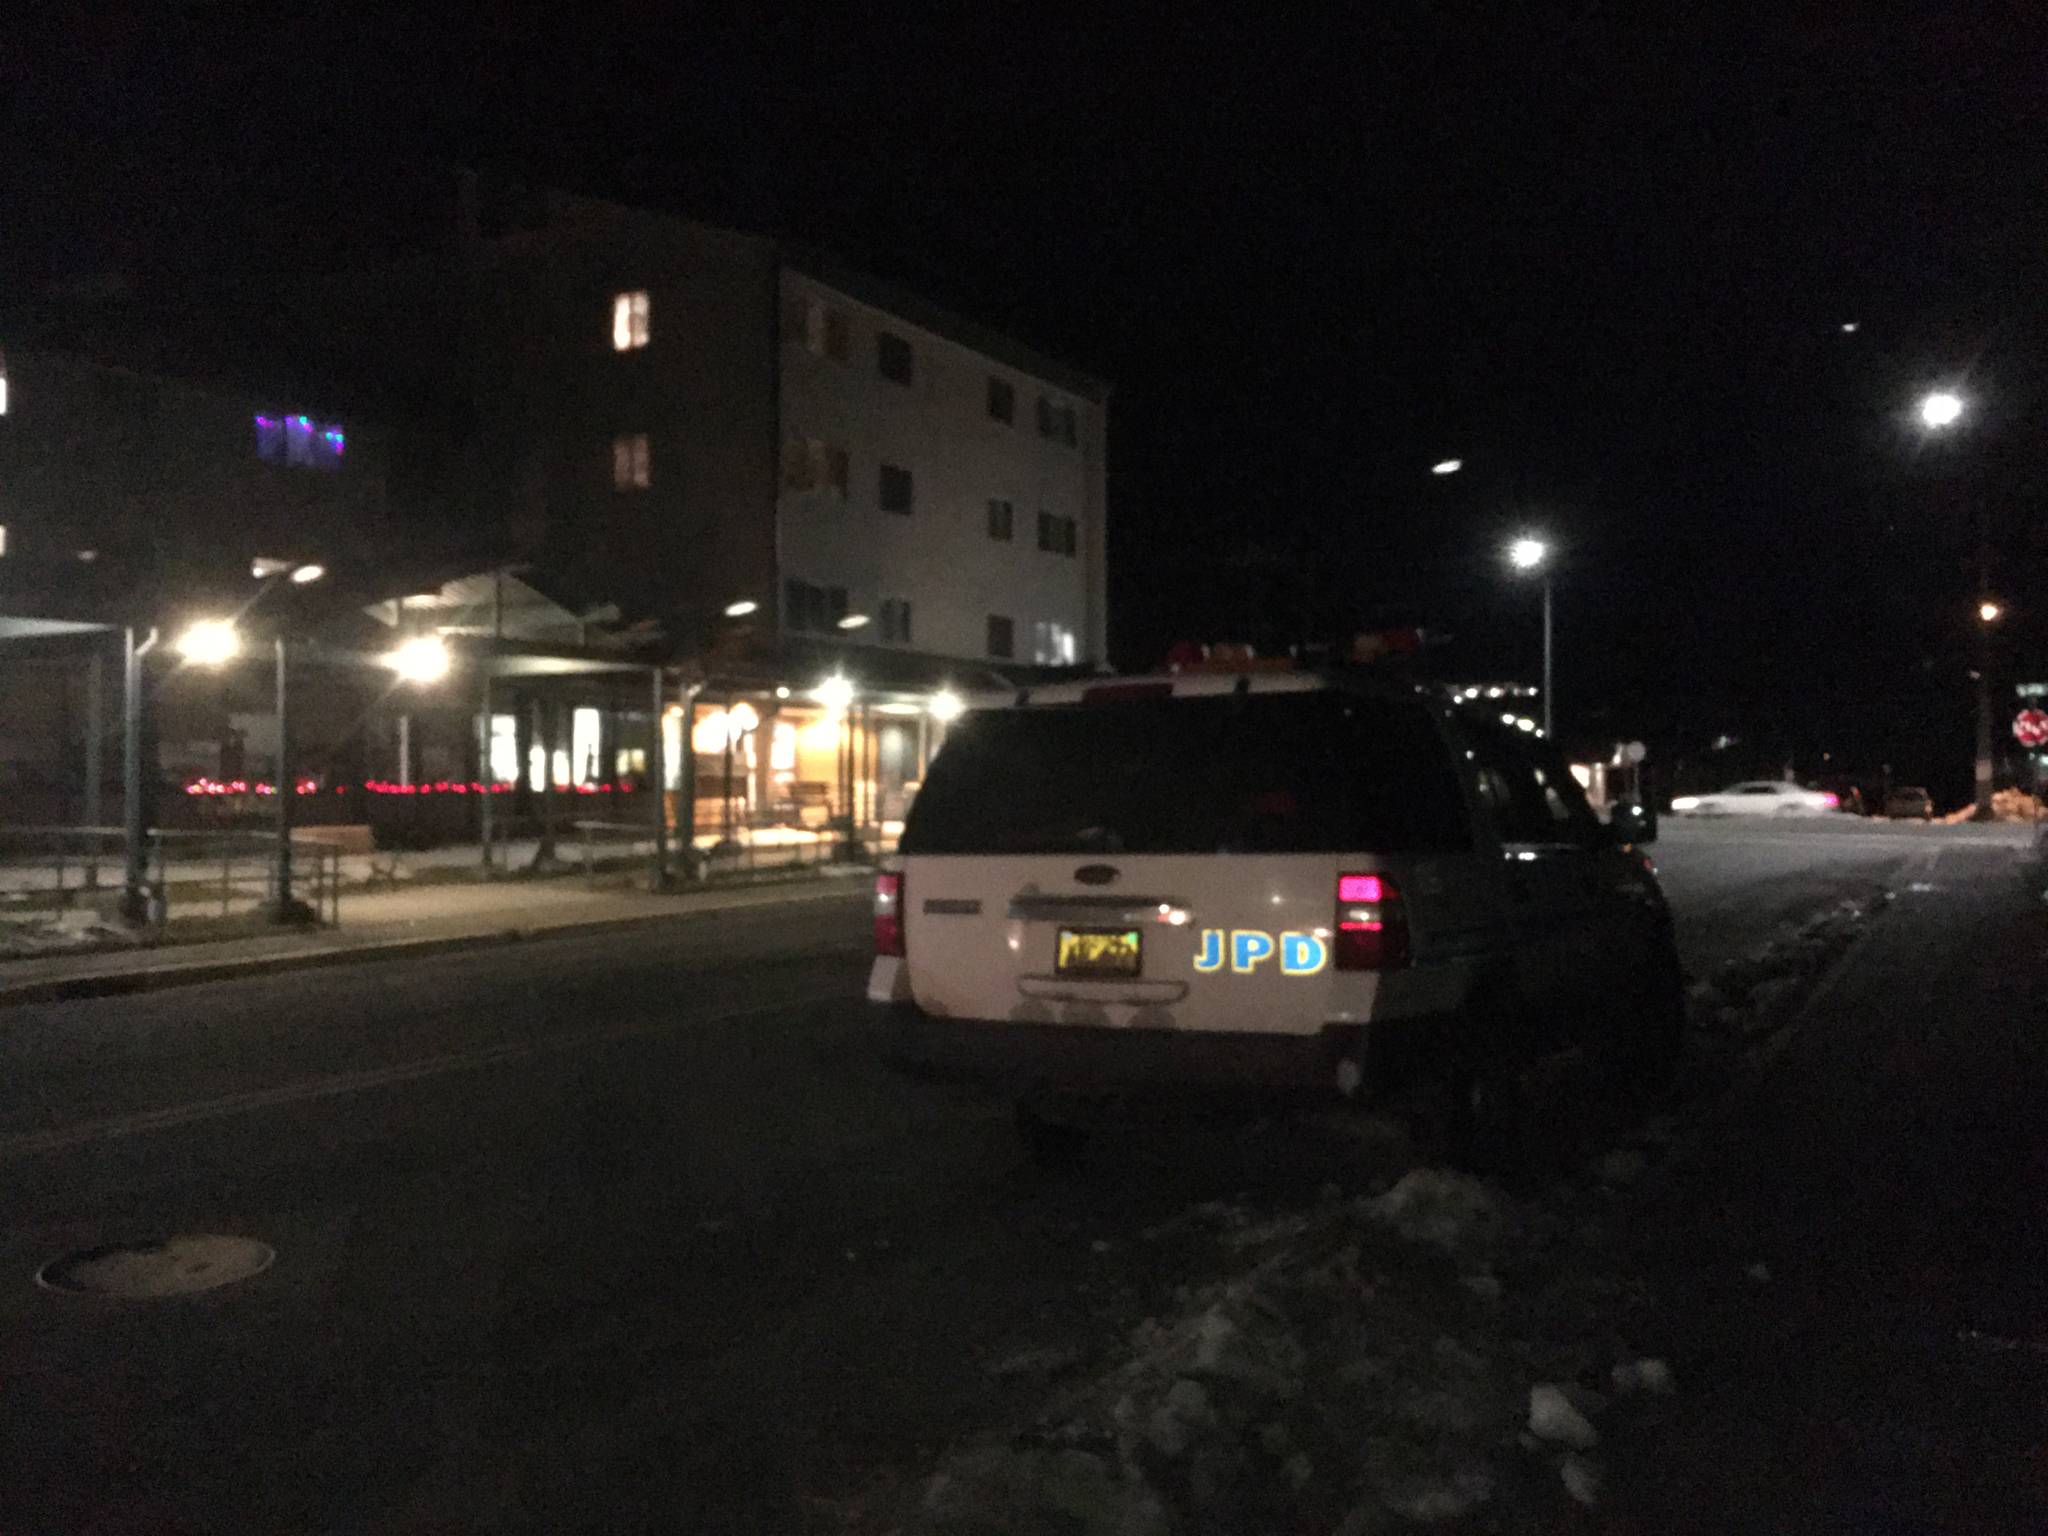 The Juneau Police Department is investigating a possible homicide of a 69-year-old man at a senior living facility downtown, Nov. 18, 2020. (Michael S. Lockett / Juneau Empire)